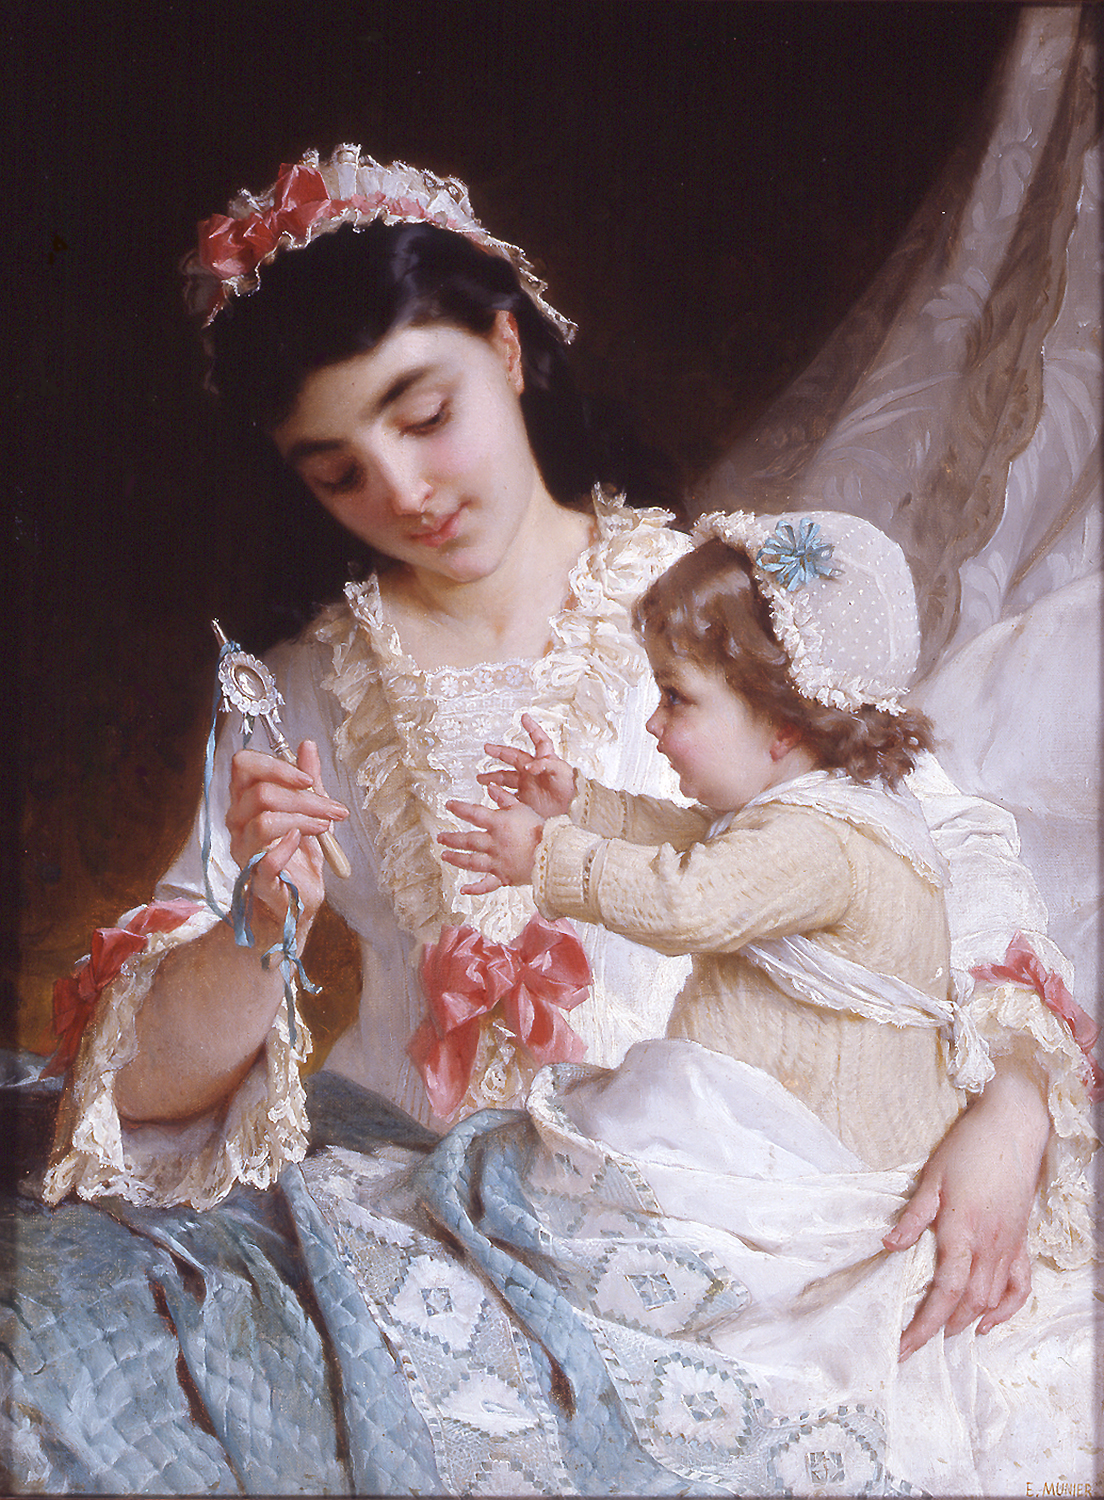 A mother and her baby playing in bed - Distracting the Baby - Emile Munier